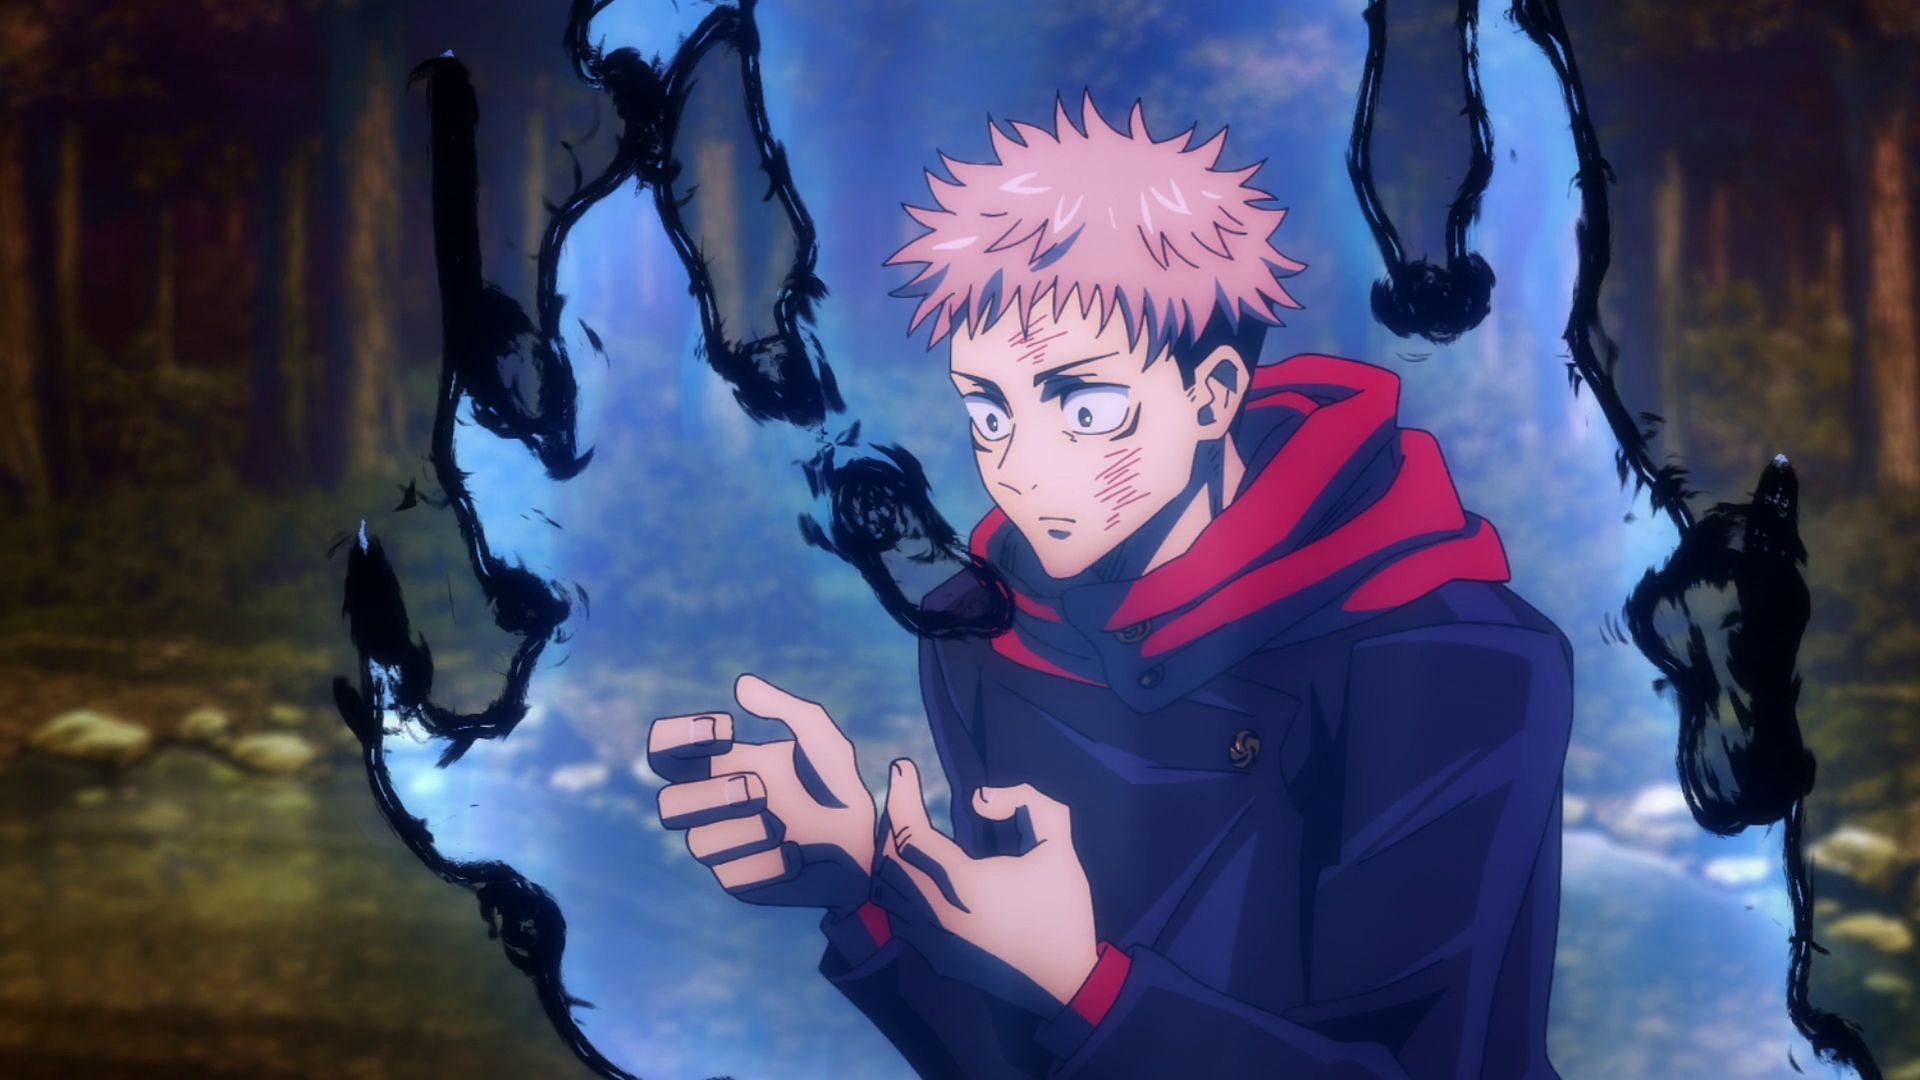 Yuji and his new Cursed Technique must shoulder the burden of defeating Sukuna in Jujutsu Kaisen chapter 245 (Image via MAPPA Studios)